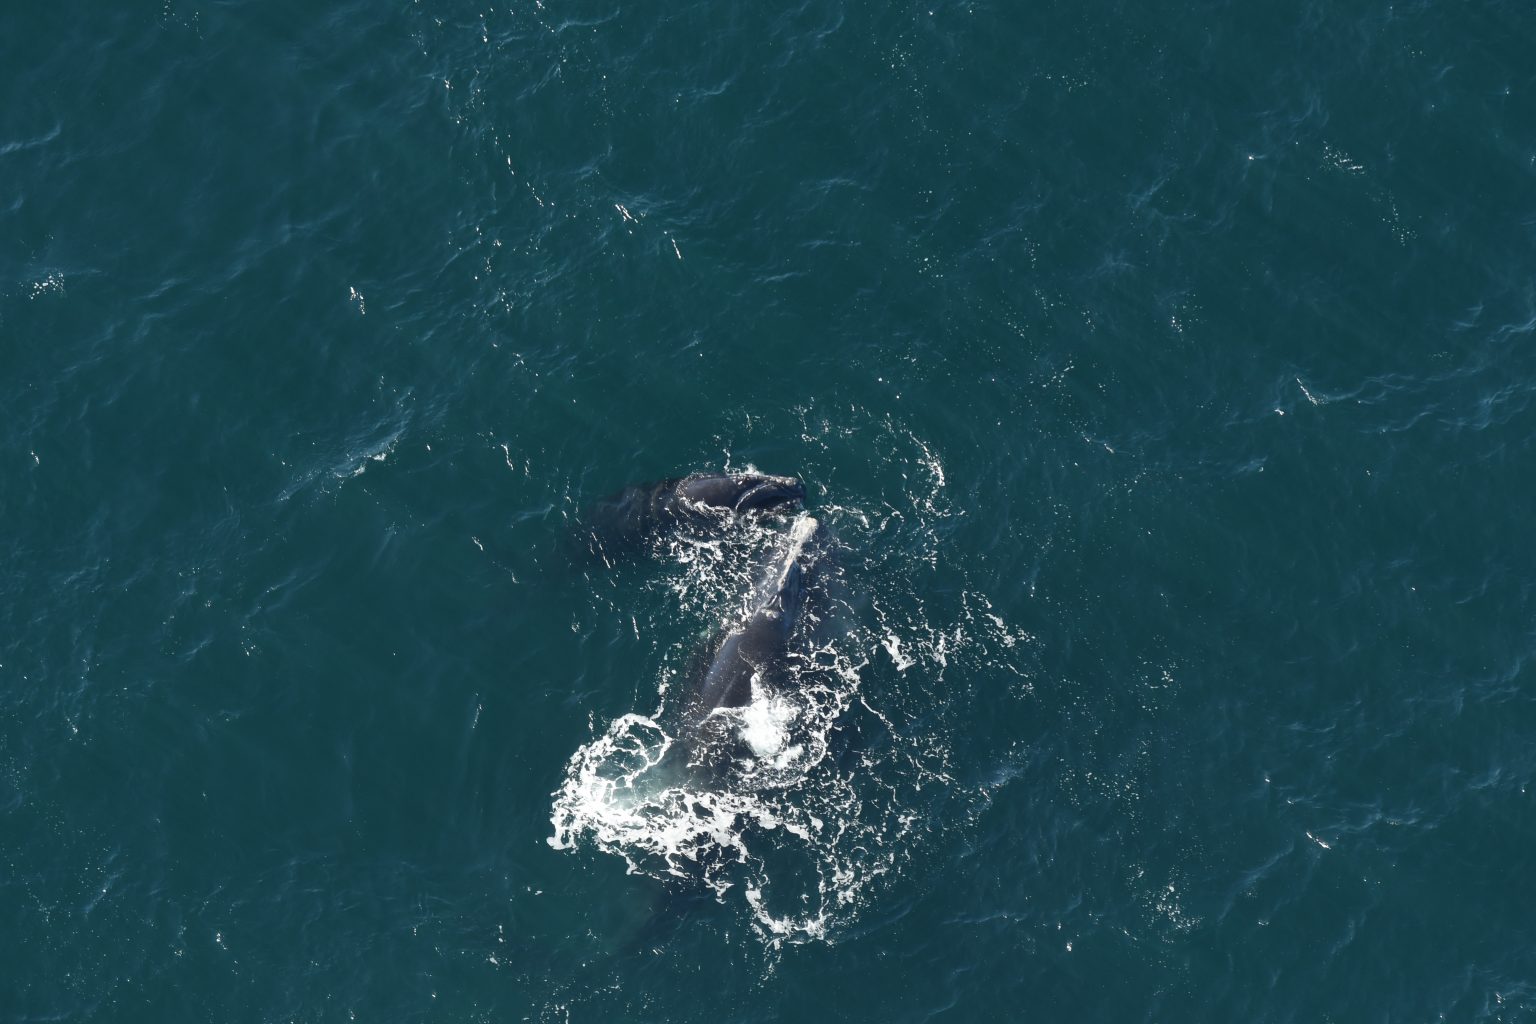 Latest Projection Finds North Atlantic Right Whale Population at Lowest Point in Almost 20 Years